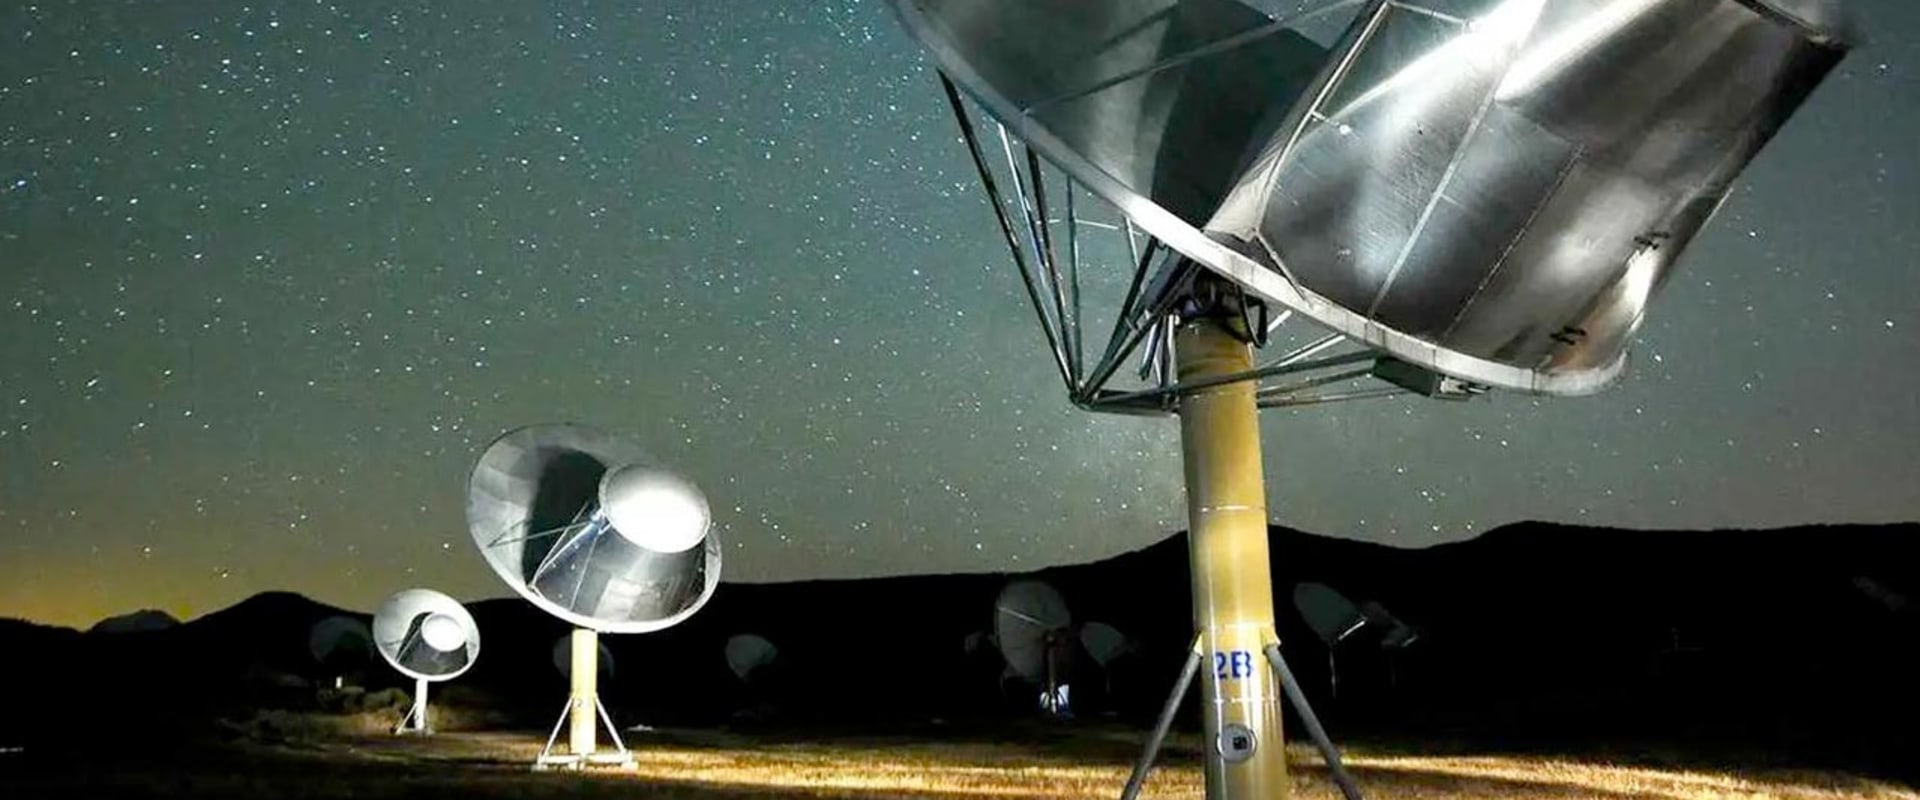 The Latest Developments and Findings in SETI Research